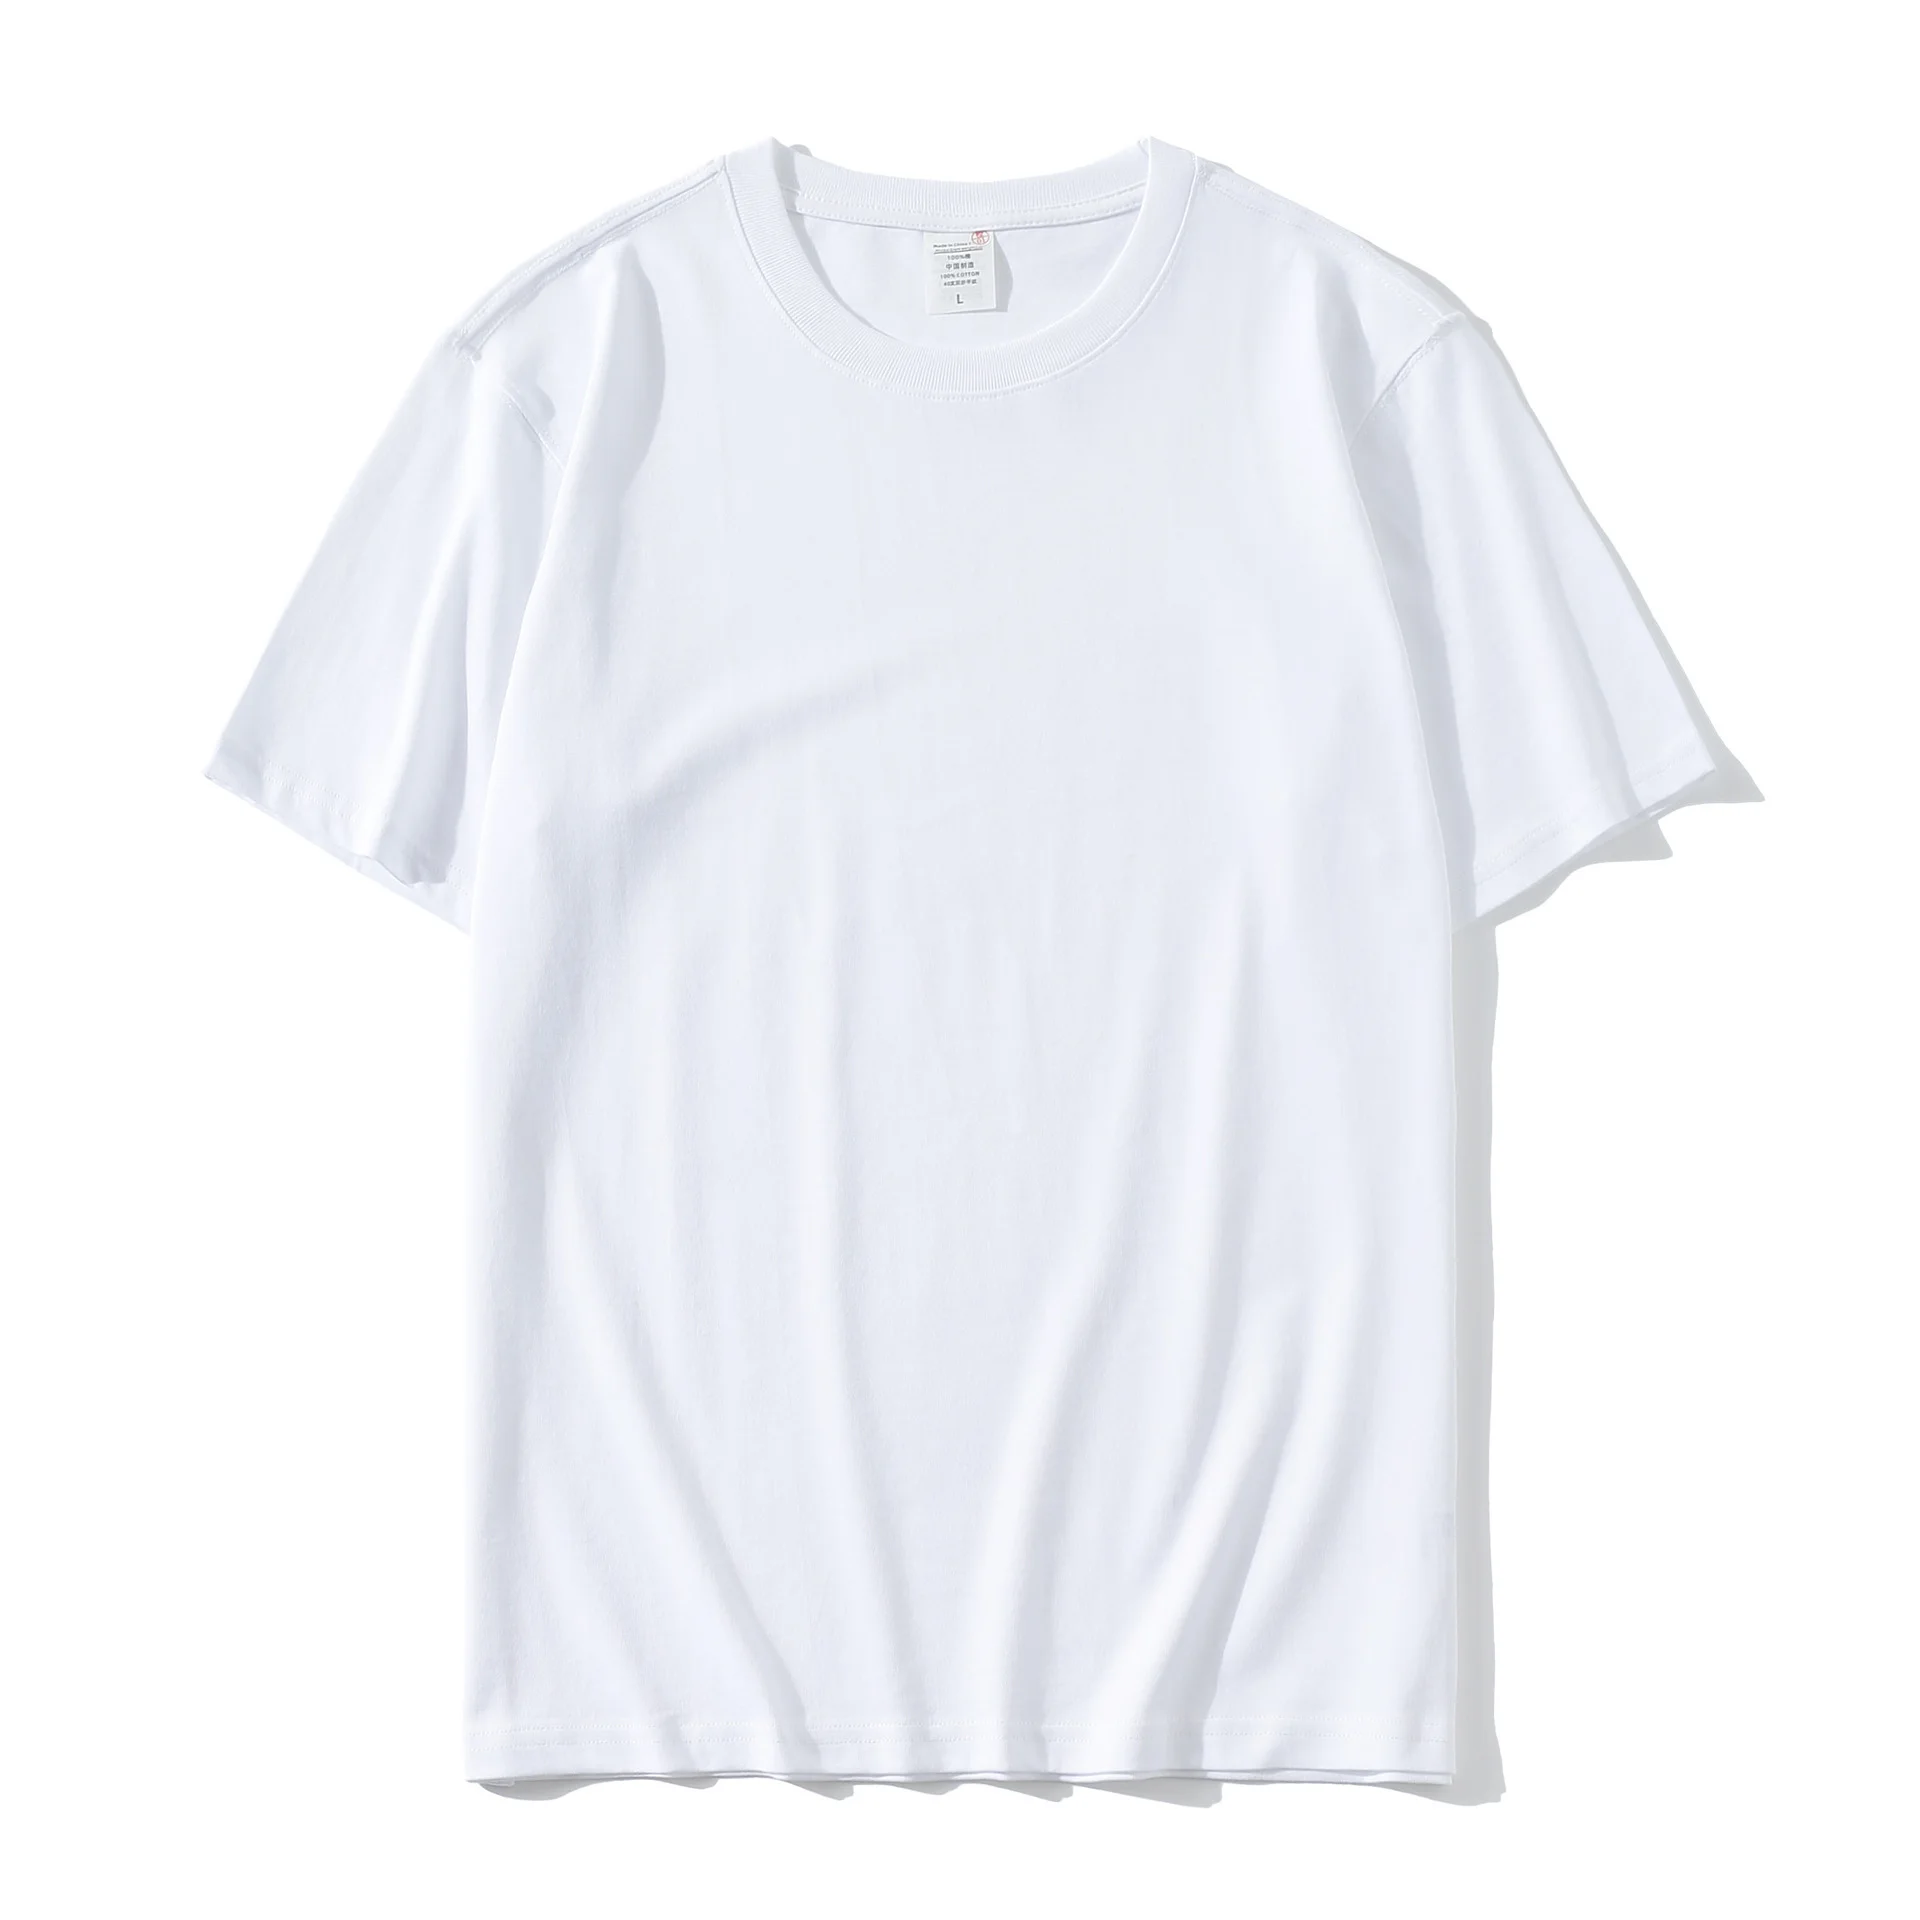 best blank t-shirts for screen printing - Bangladesh Factory, Suppliers, Manufacturers